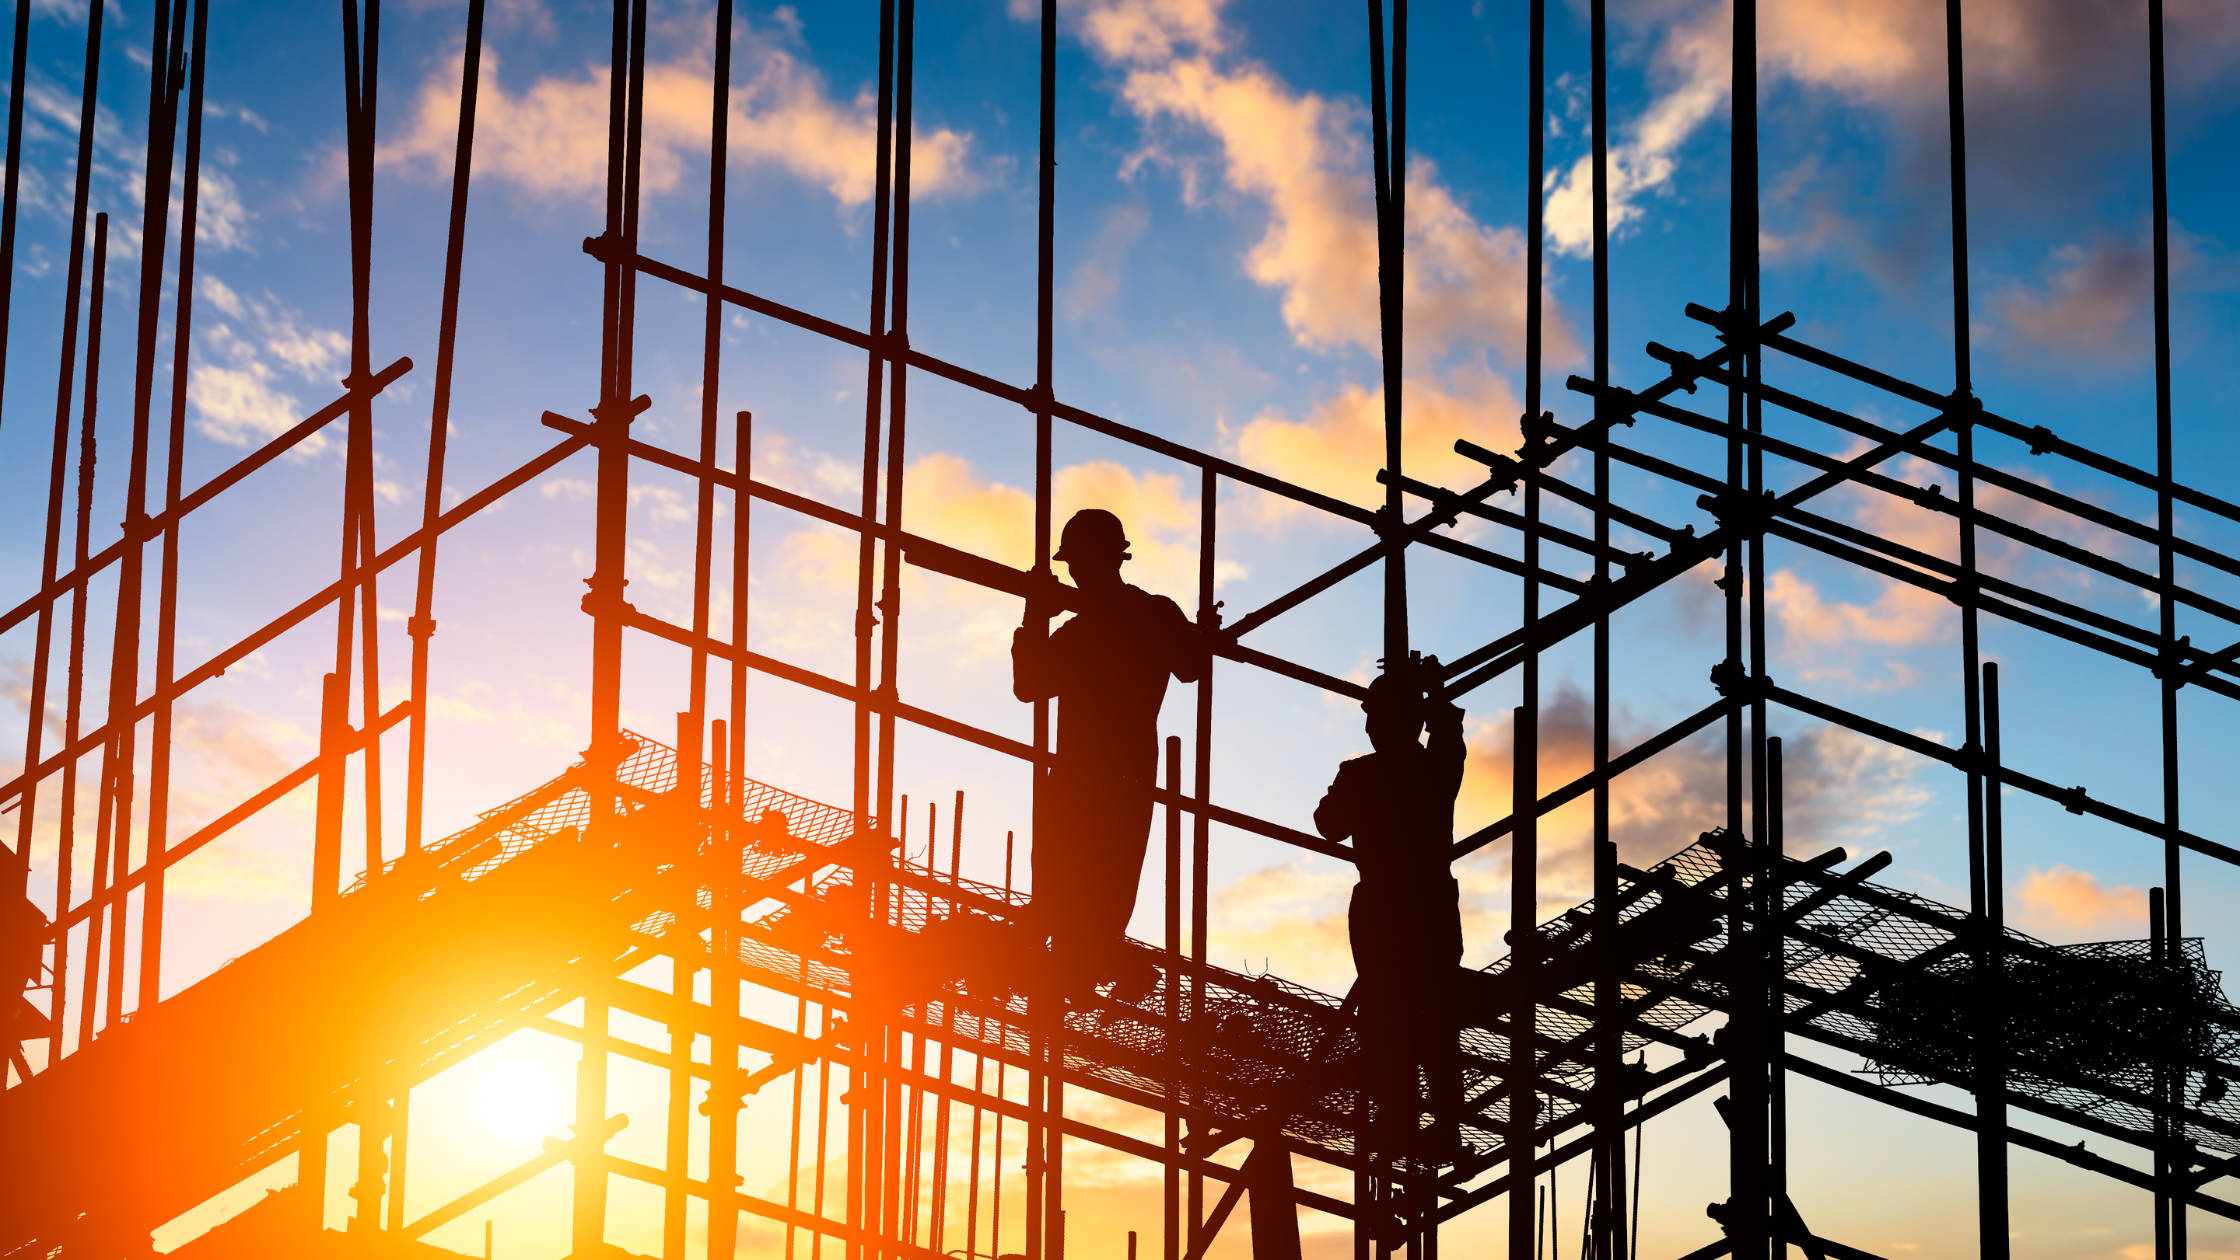 Revolutionizing Project Management: The Latest Construction Software Solutions